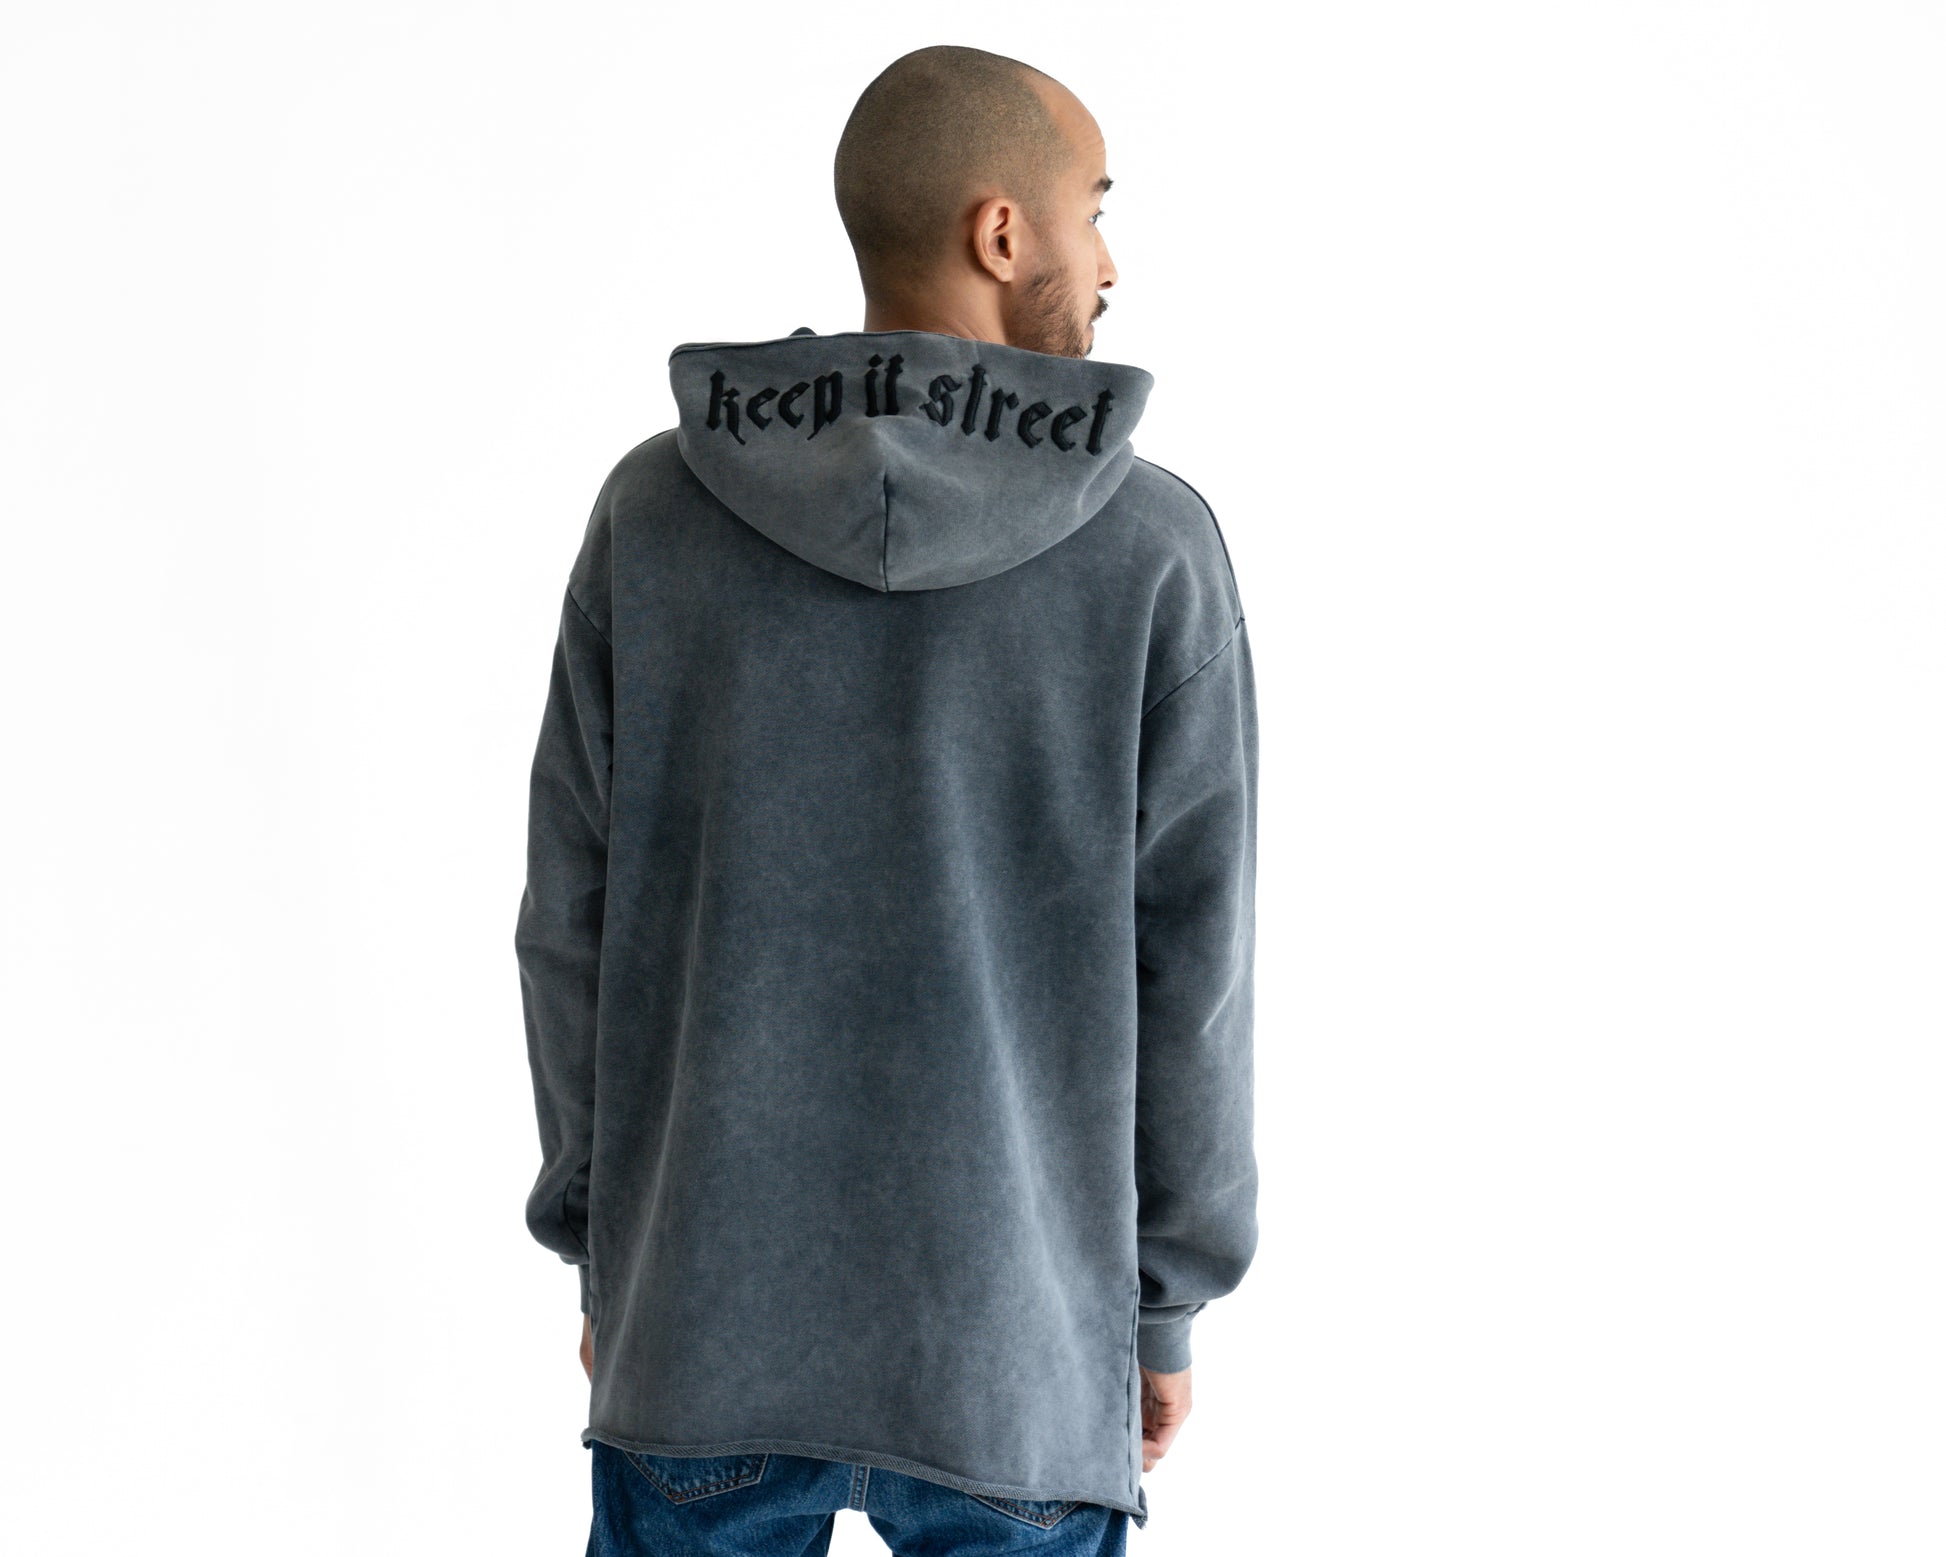 Hoodie "Keep it Street" with embroidery on the hood in gray streetwear drift